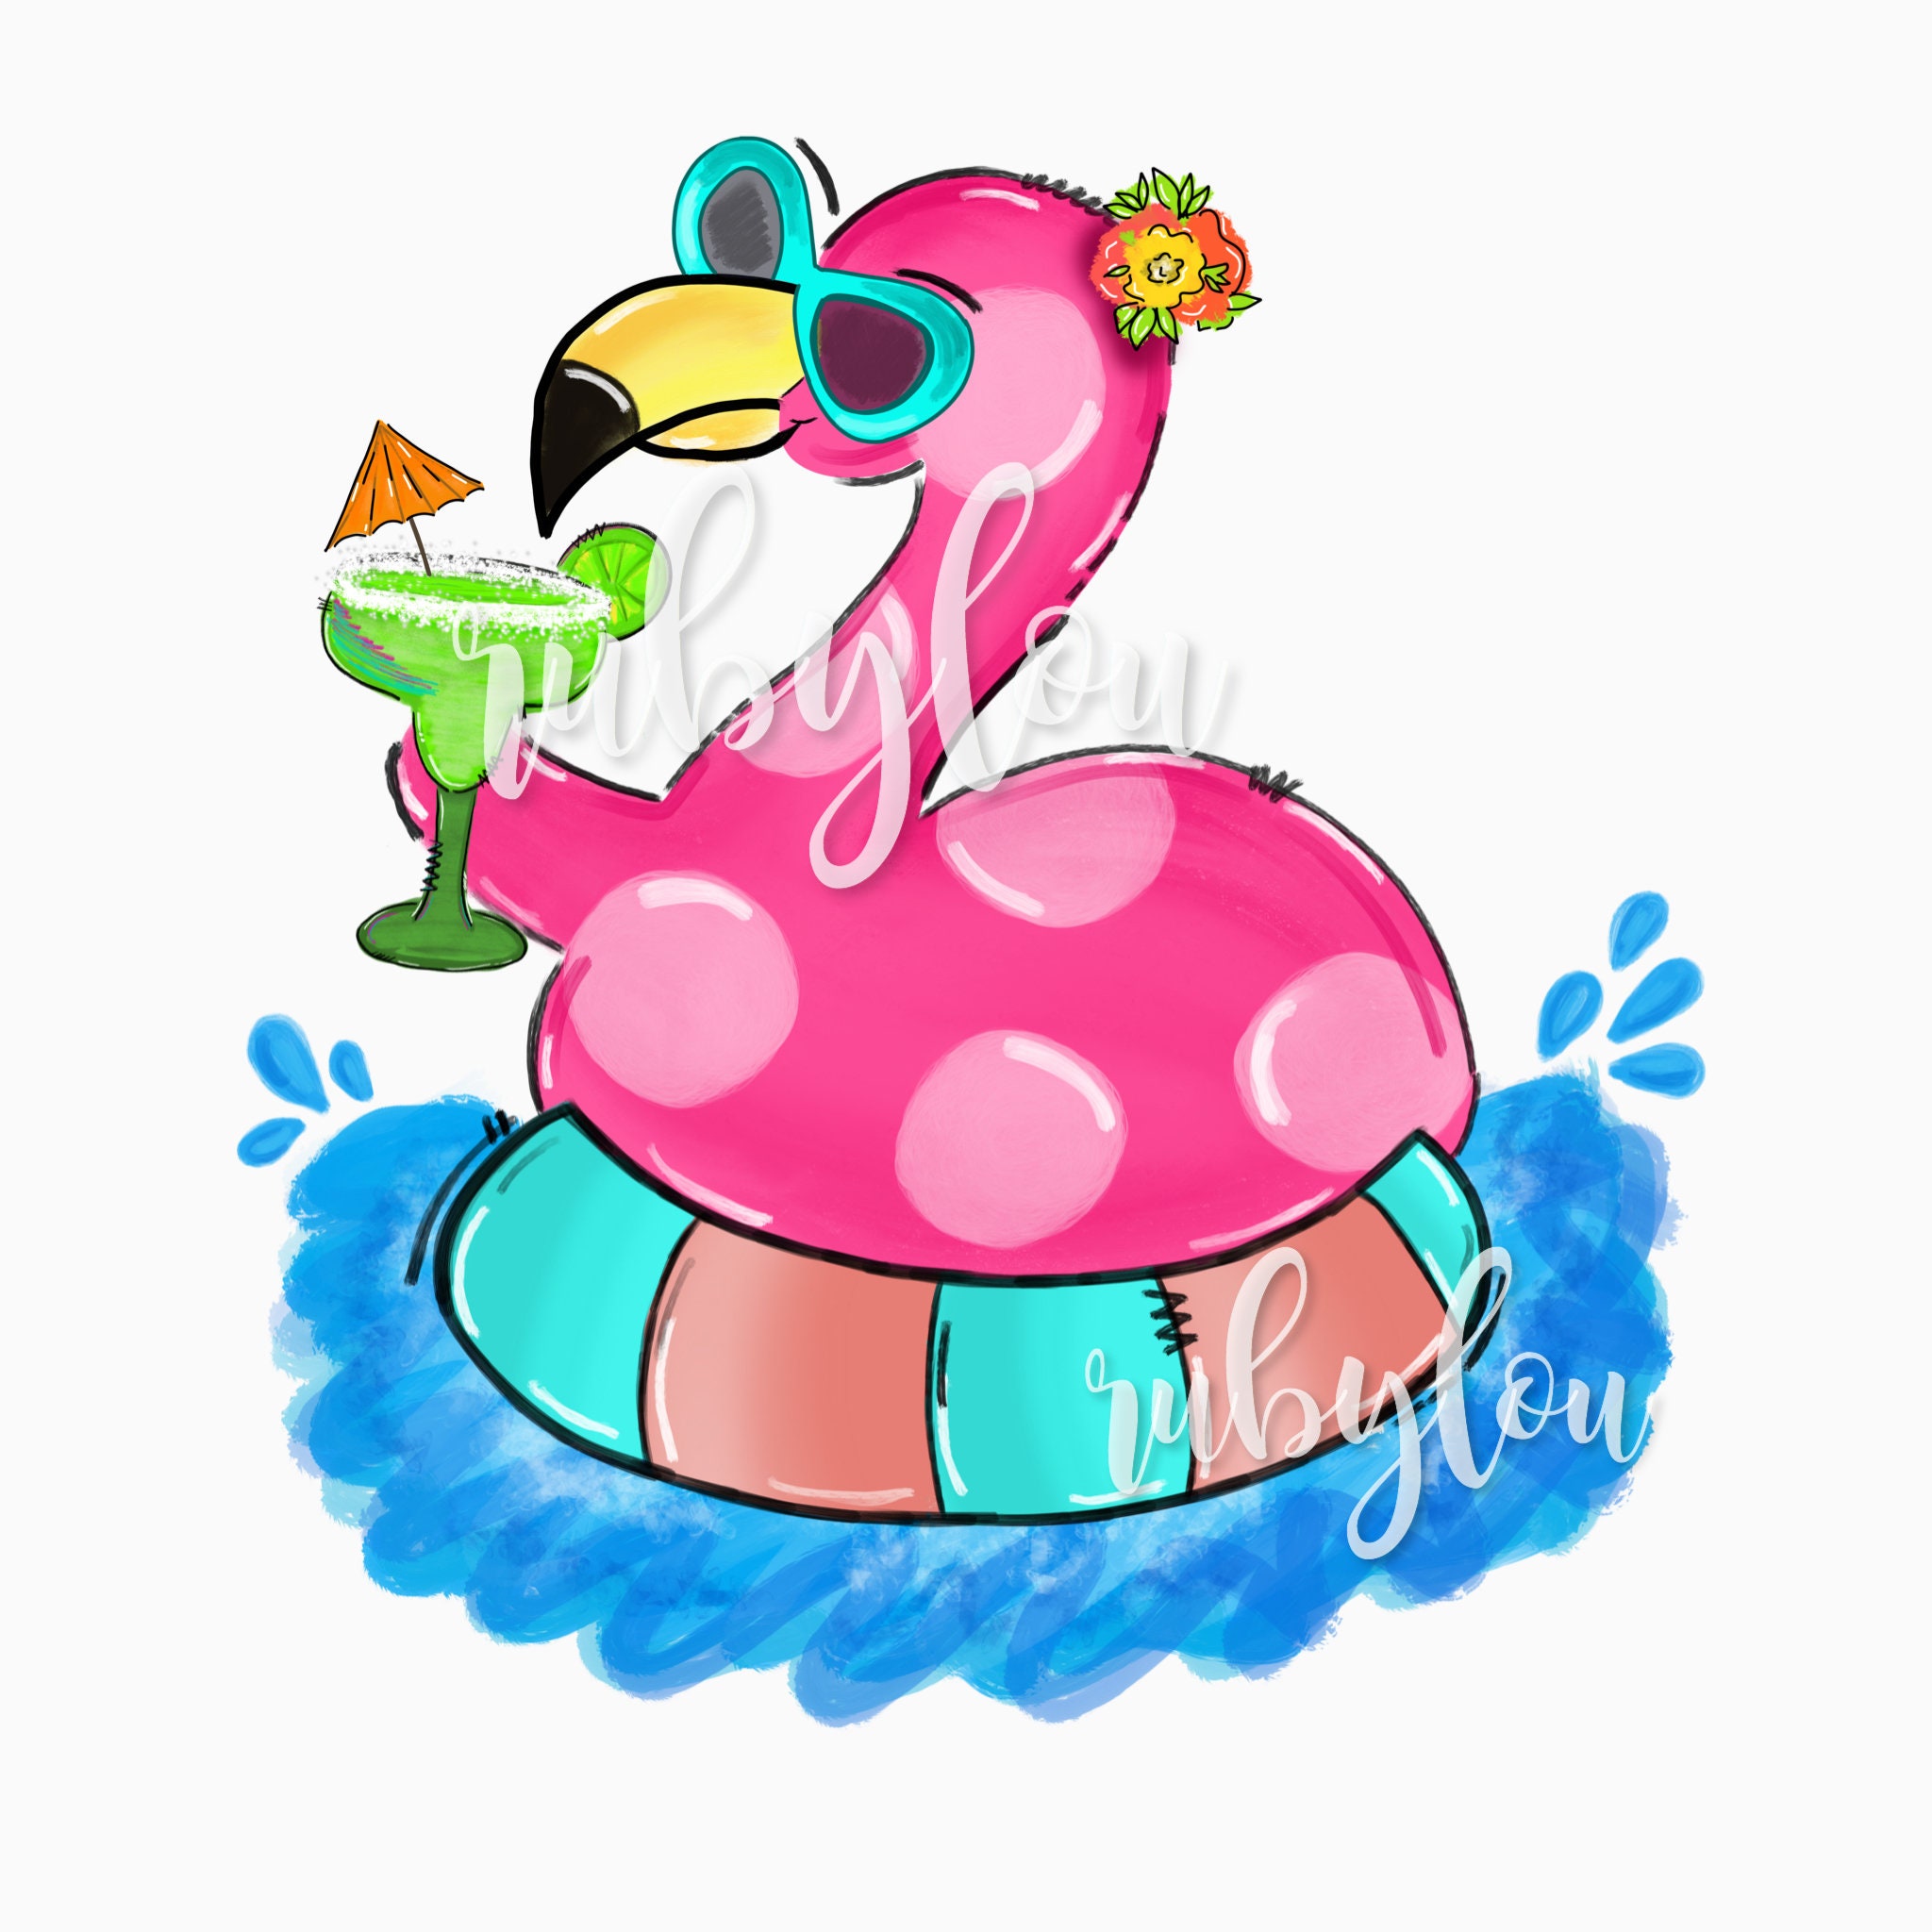 It's Pool Party Time PNG, Flamingo PNG Graphic by titi.pretty.art ·  Creative Fabrica